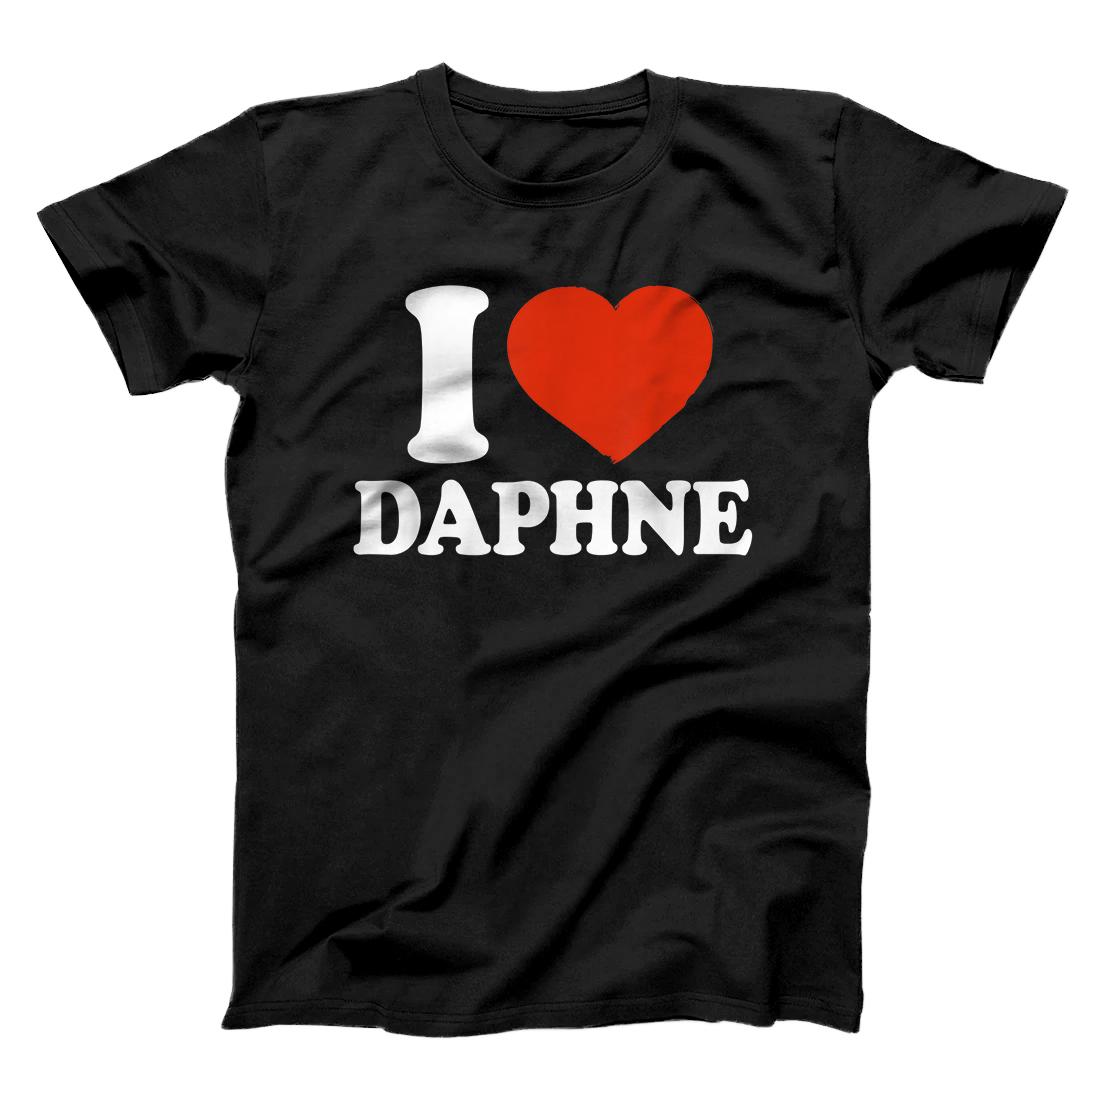 Personalized I Love Daphne, I Heart Daphne, Red Heart Valentine T-Shirt